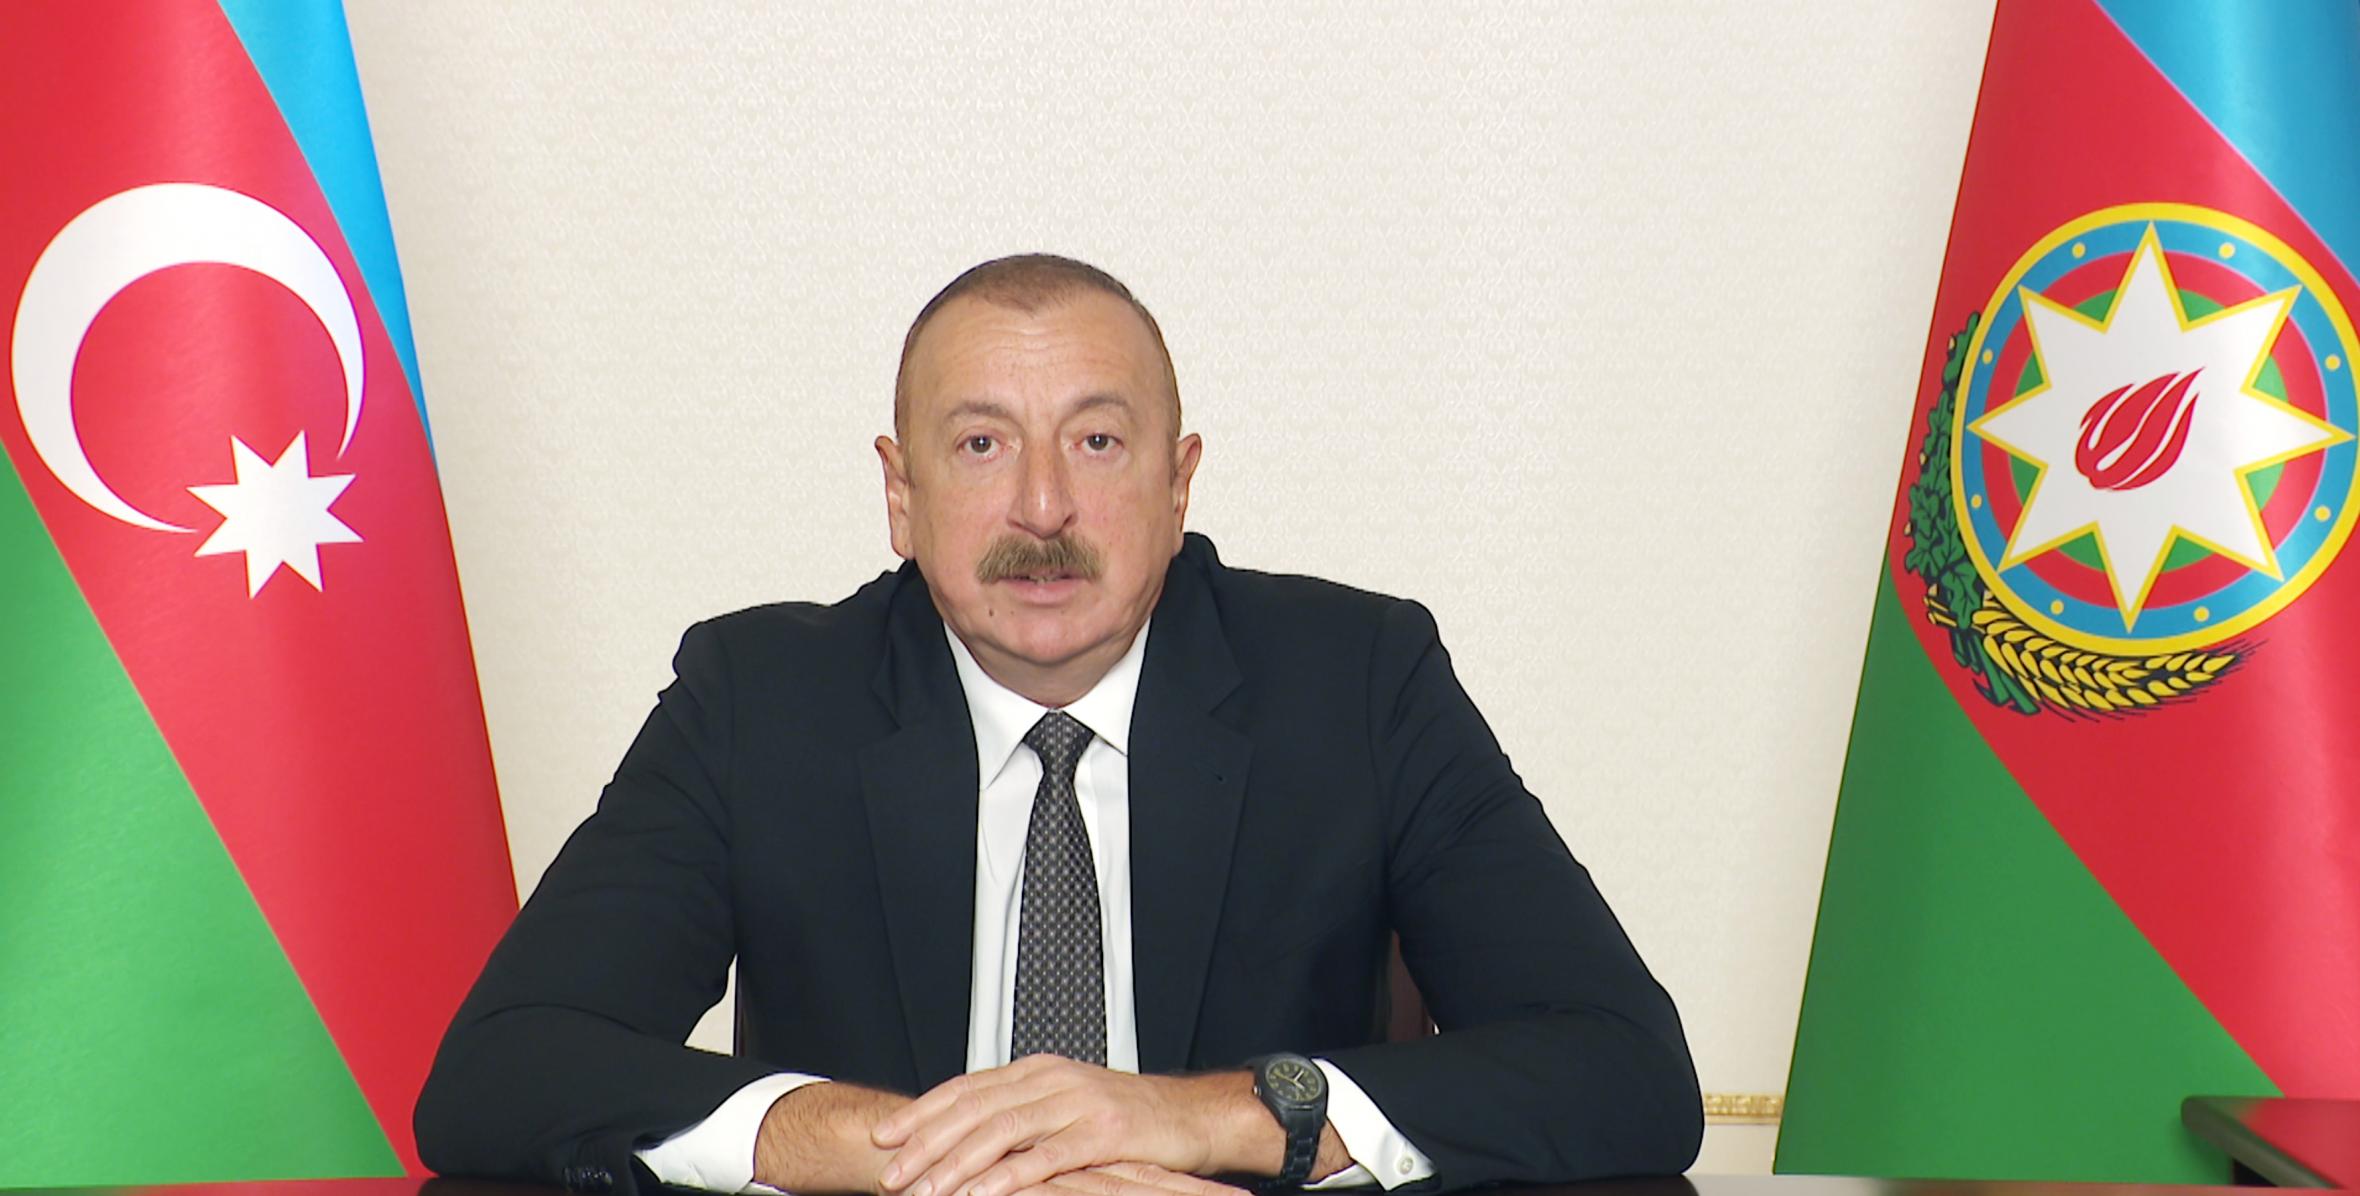 Video address by President Ilham Aliyev on the occasion of the World Health Day